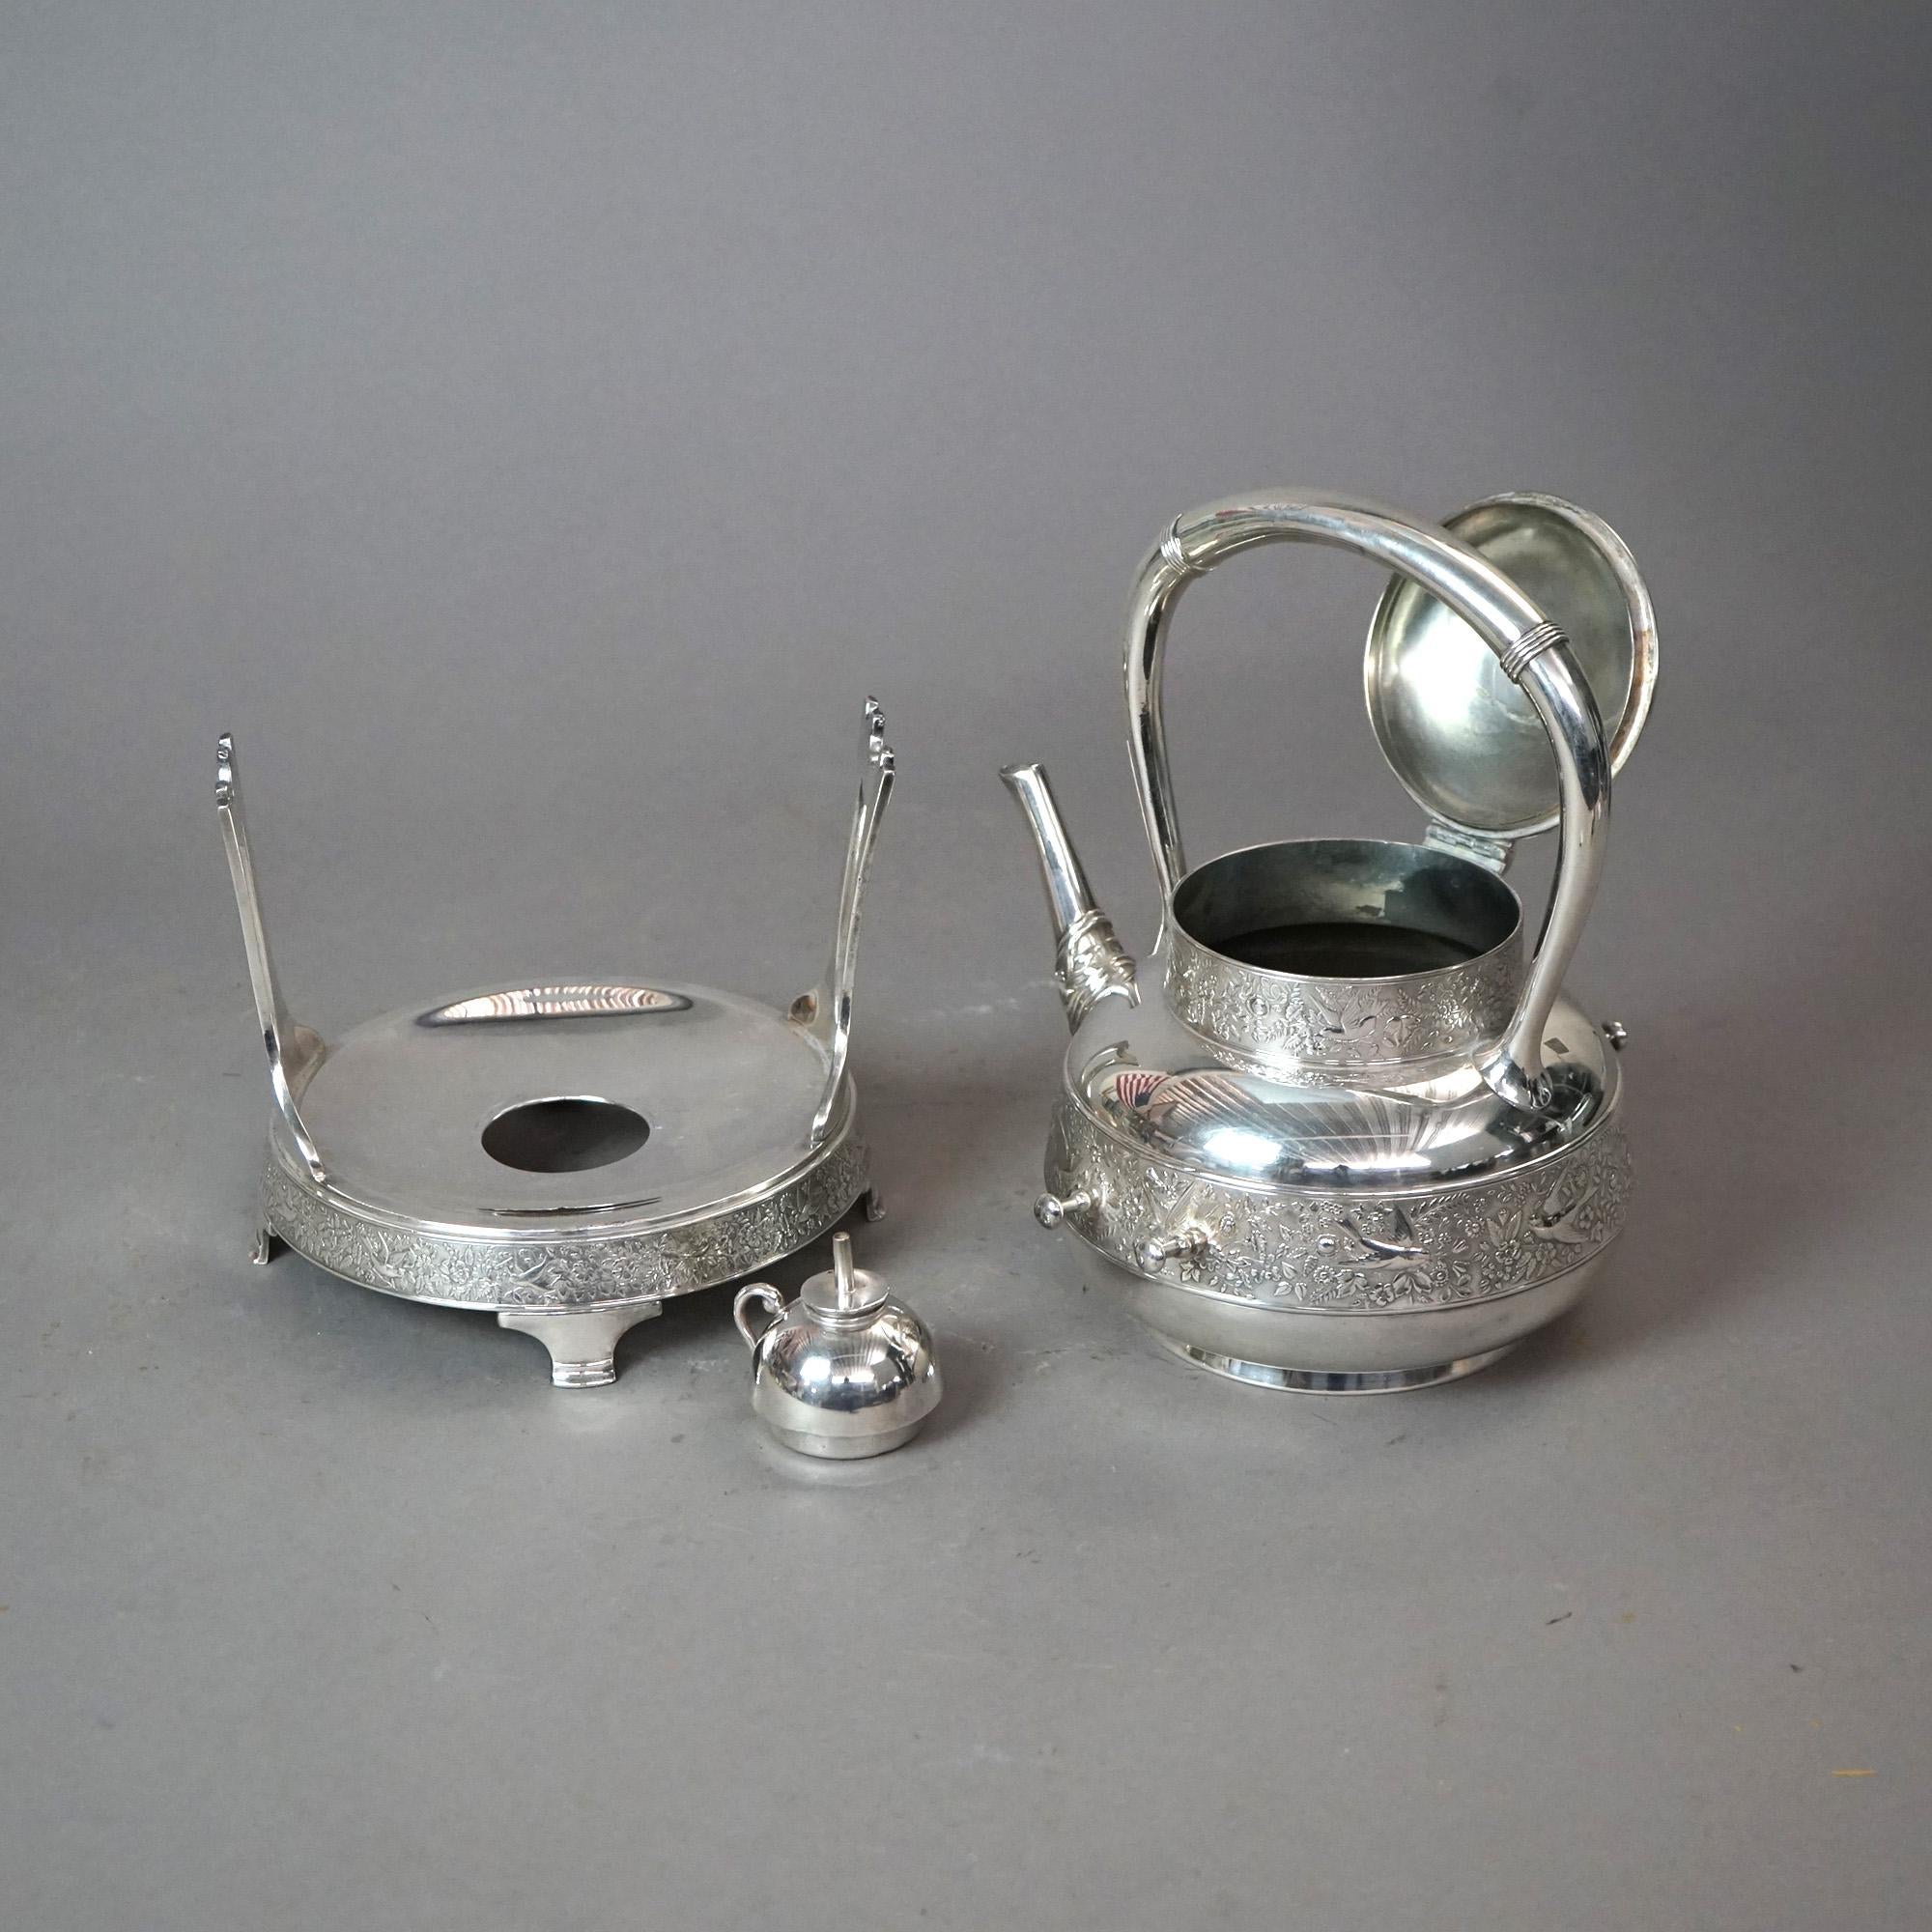 Antique Rogers Aesthetic Silver Plated Tilting Teapot & Stand with Birds C1870 For Sale 2